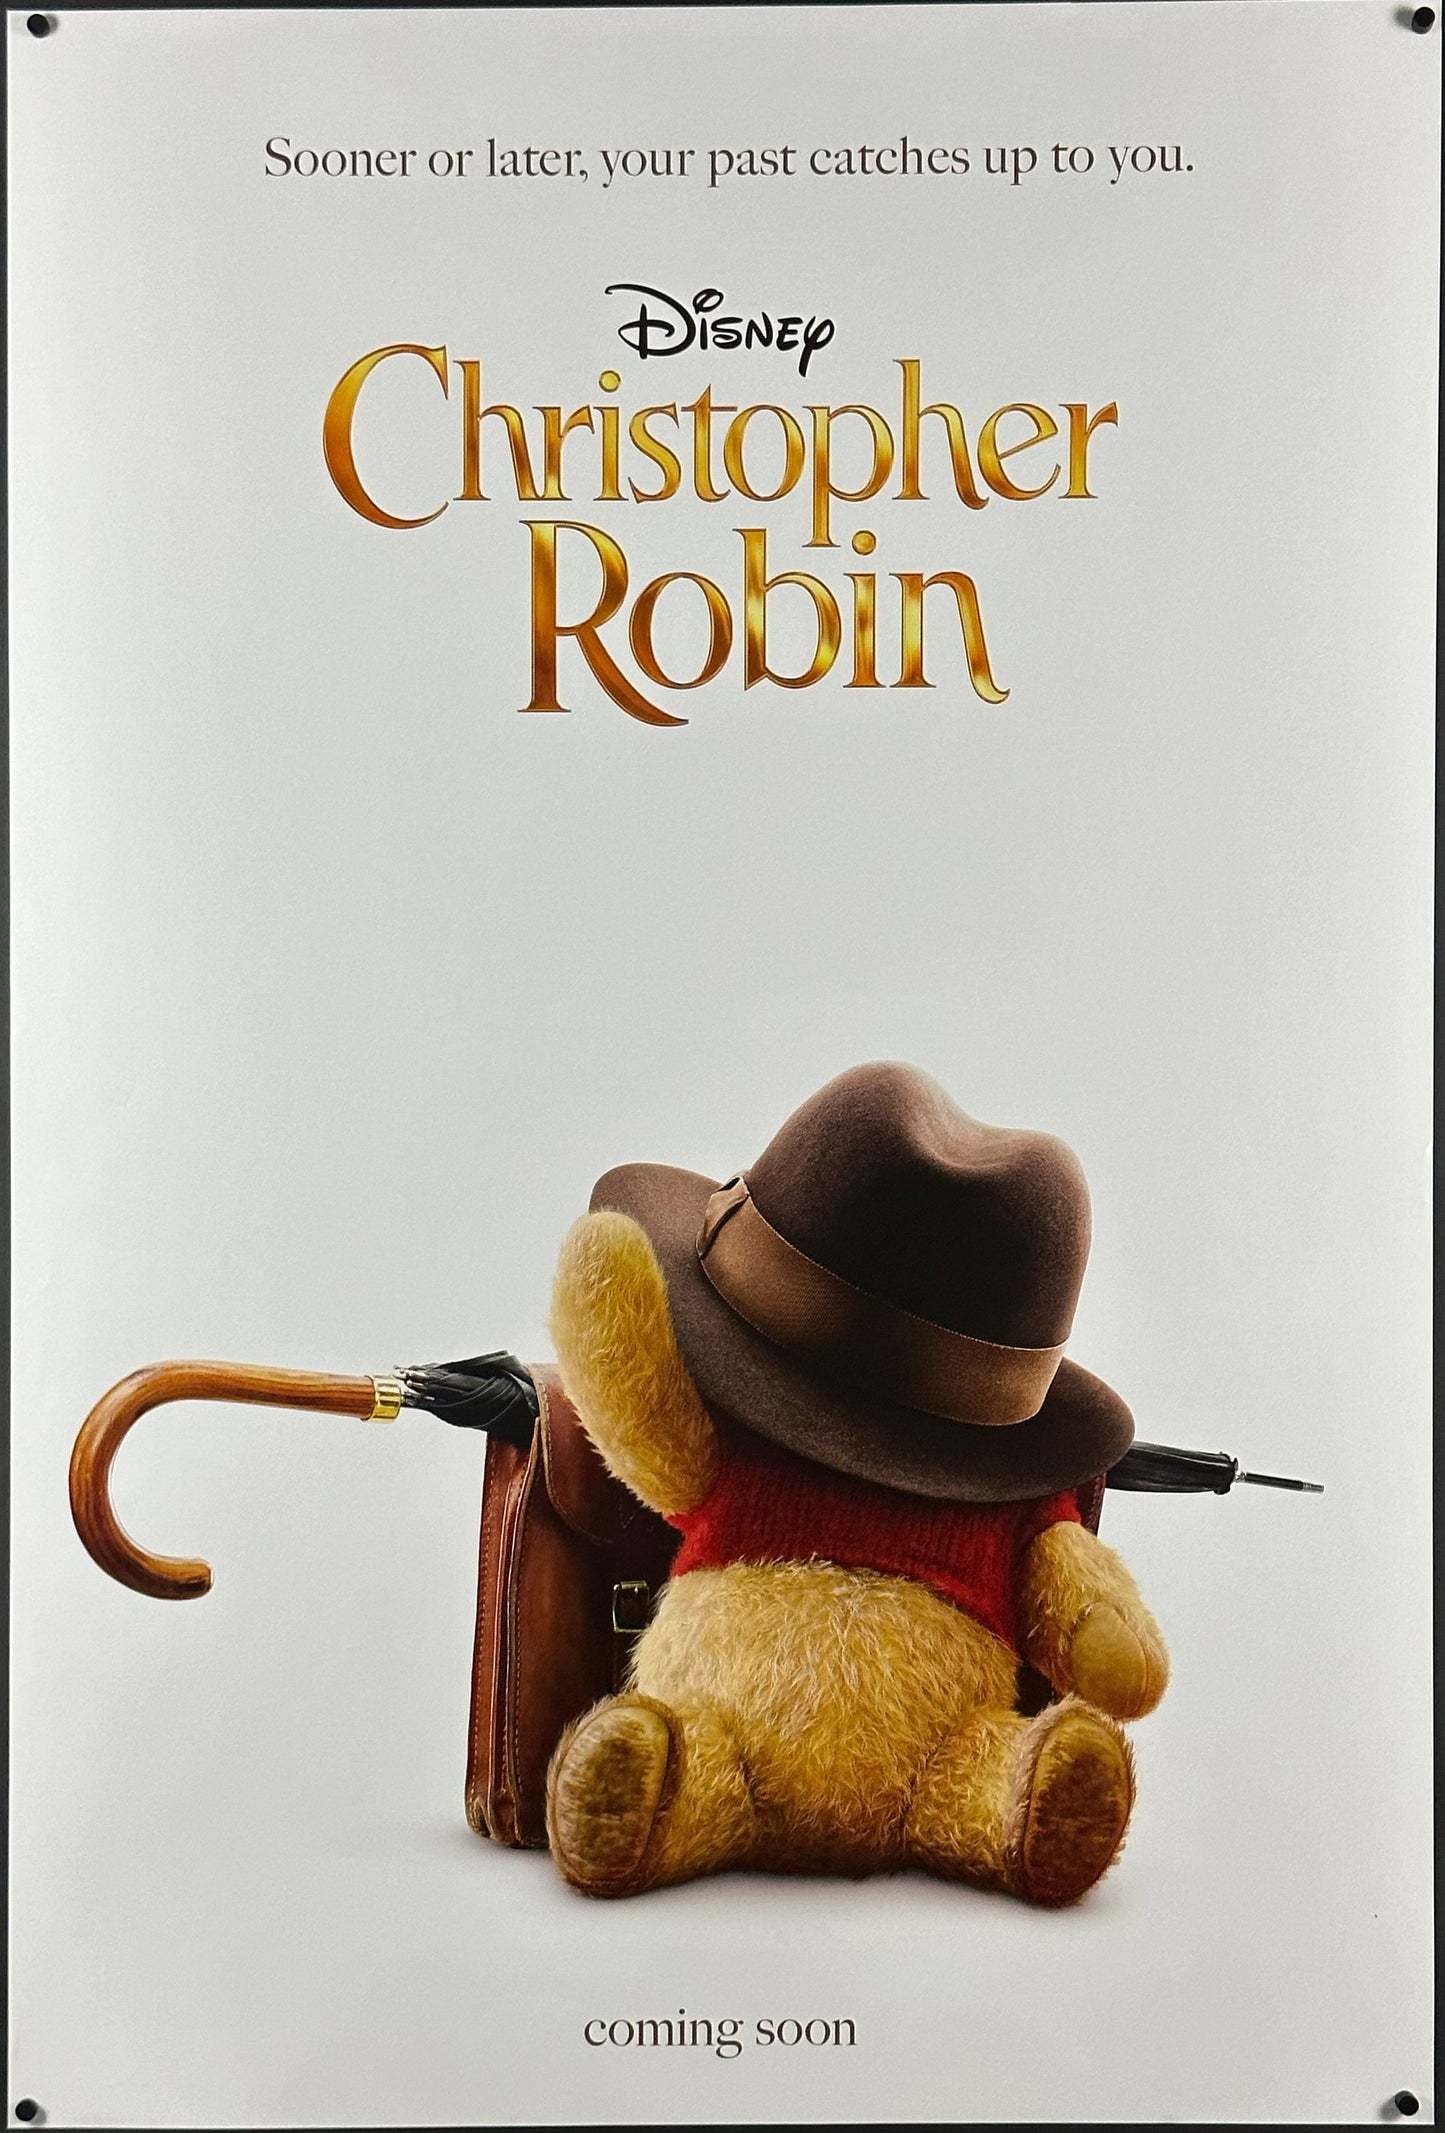 Christopher Robin US One Sheet (2018) - ORIGINAL RELEASE - posterpalace.com